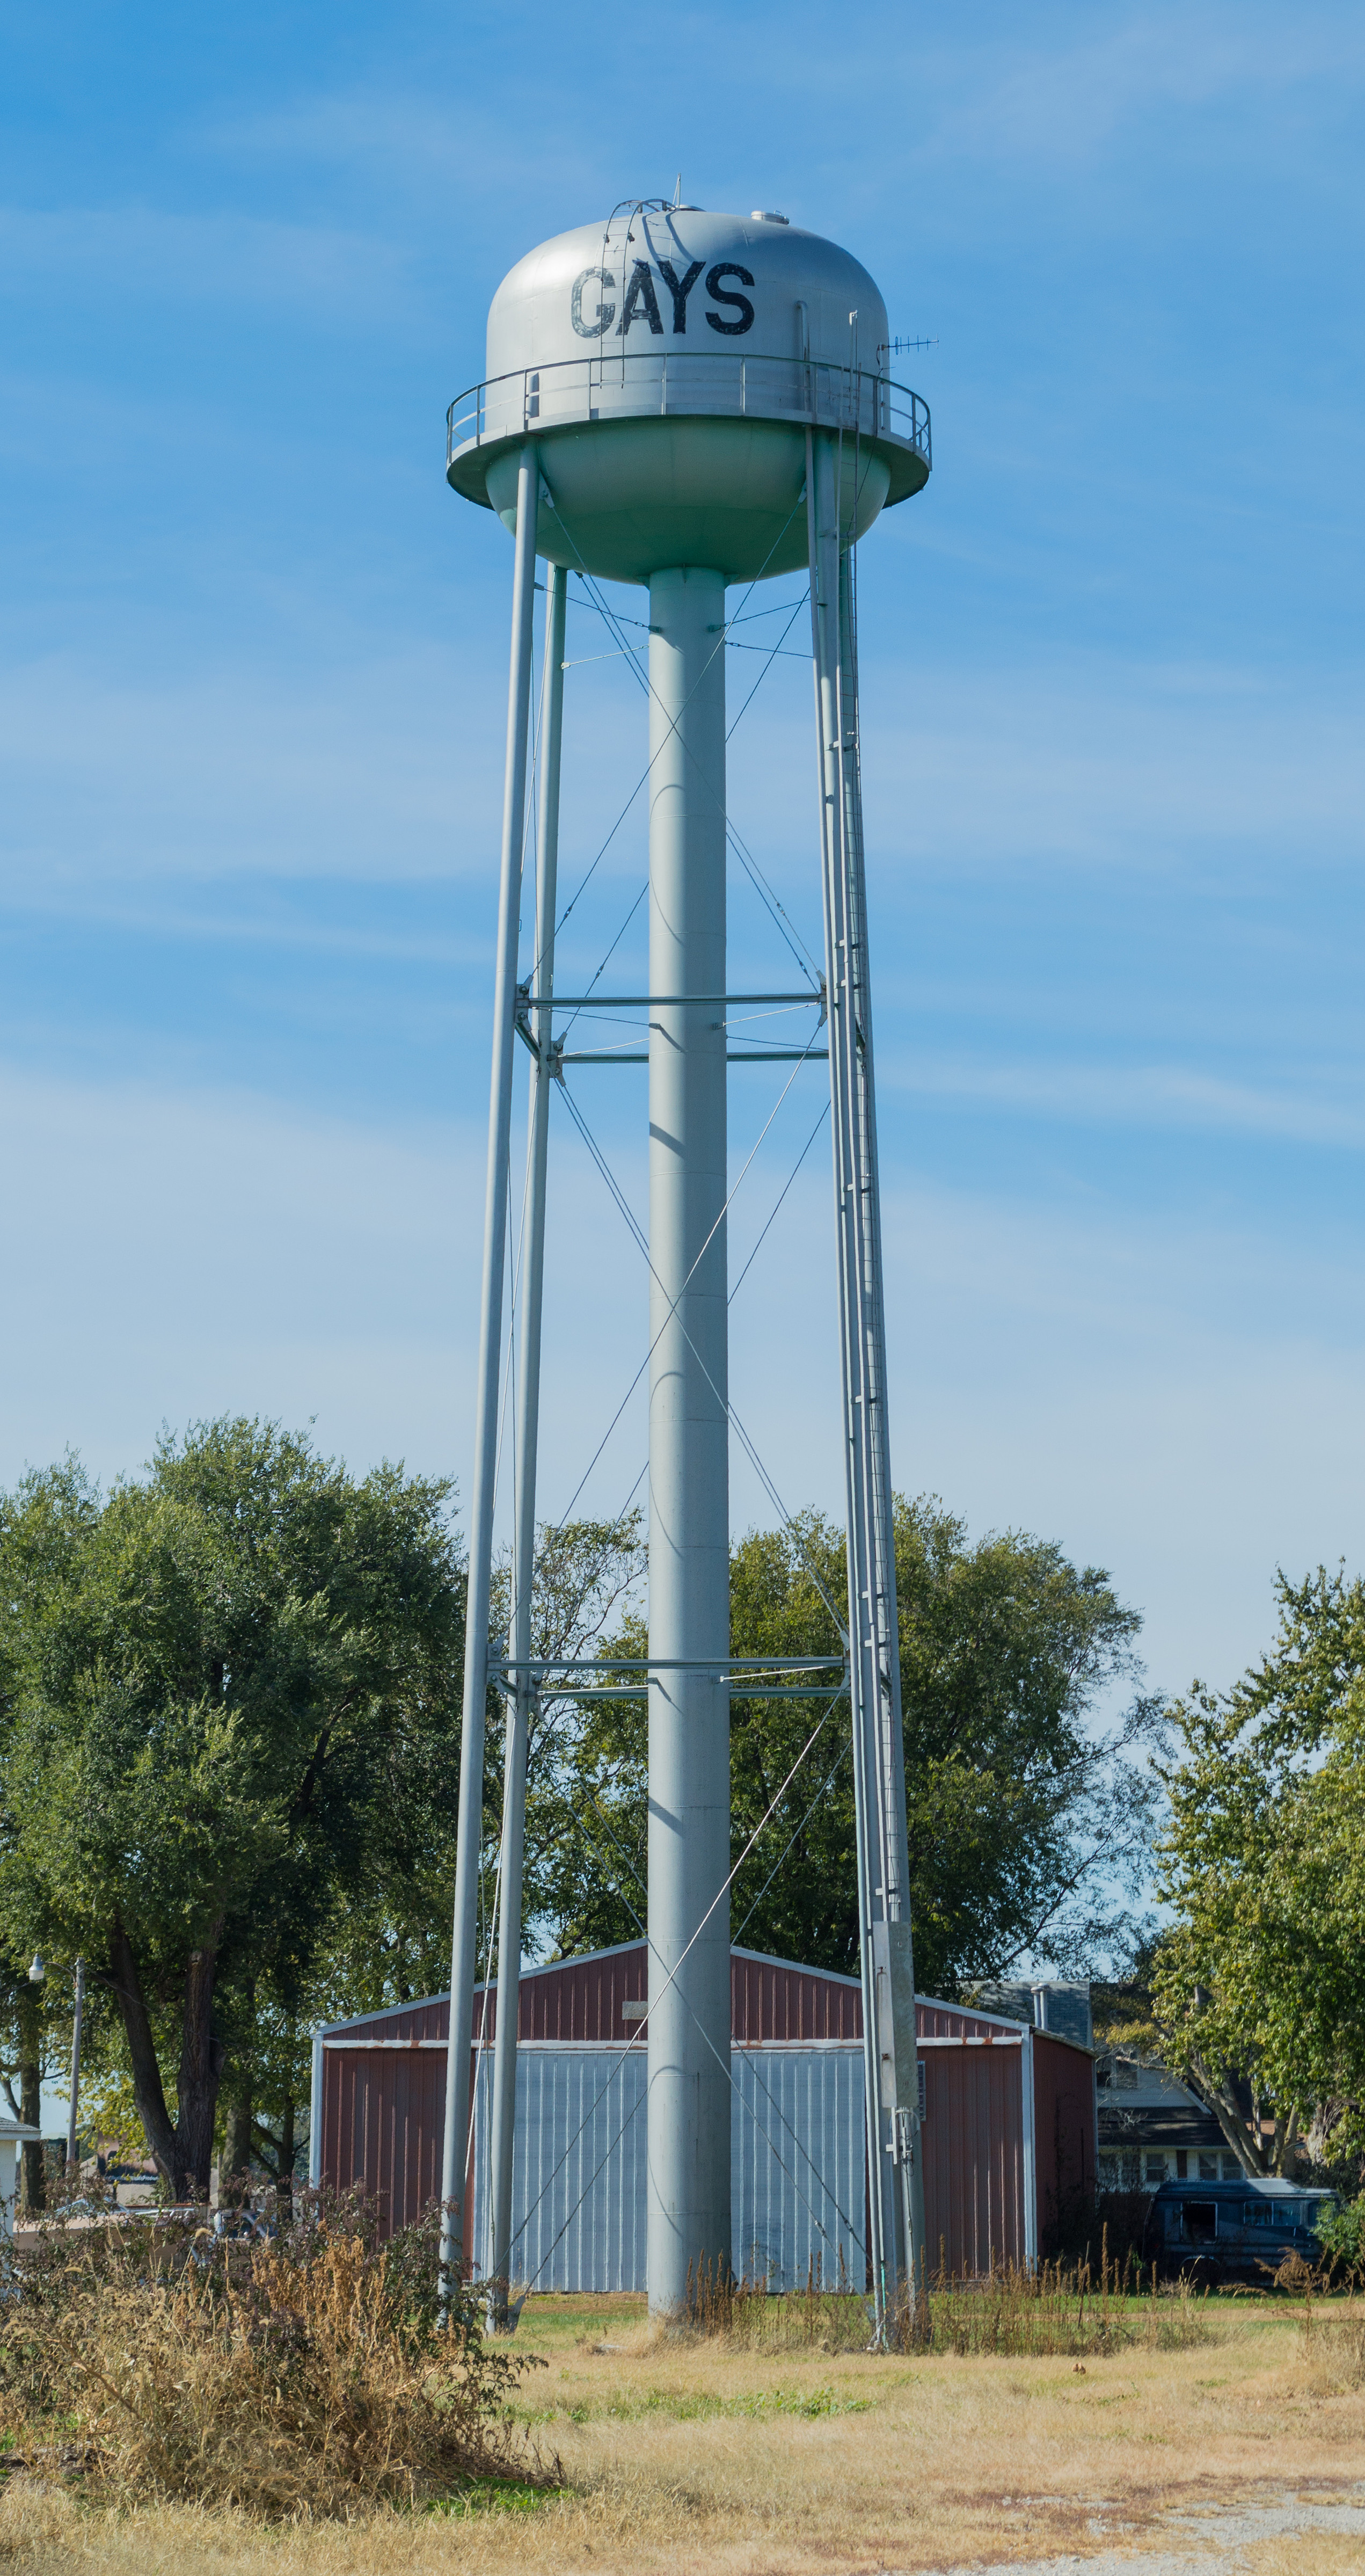 Water tower in Gays, Illinois